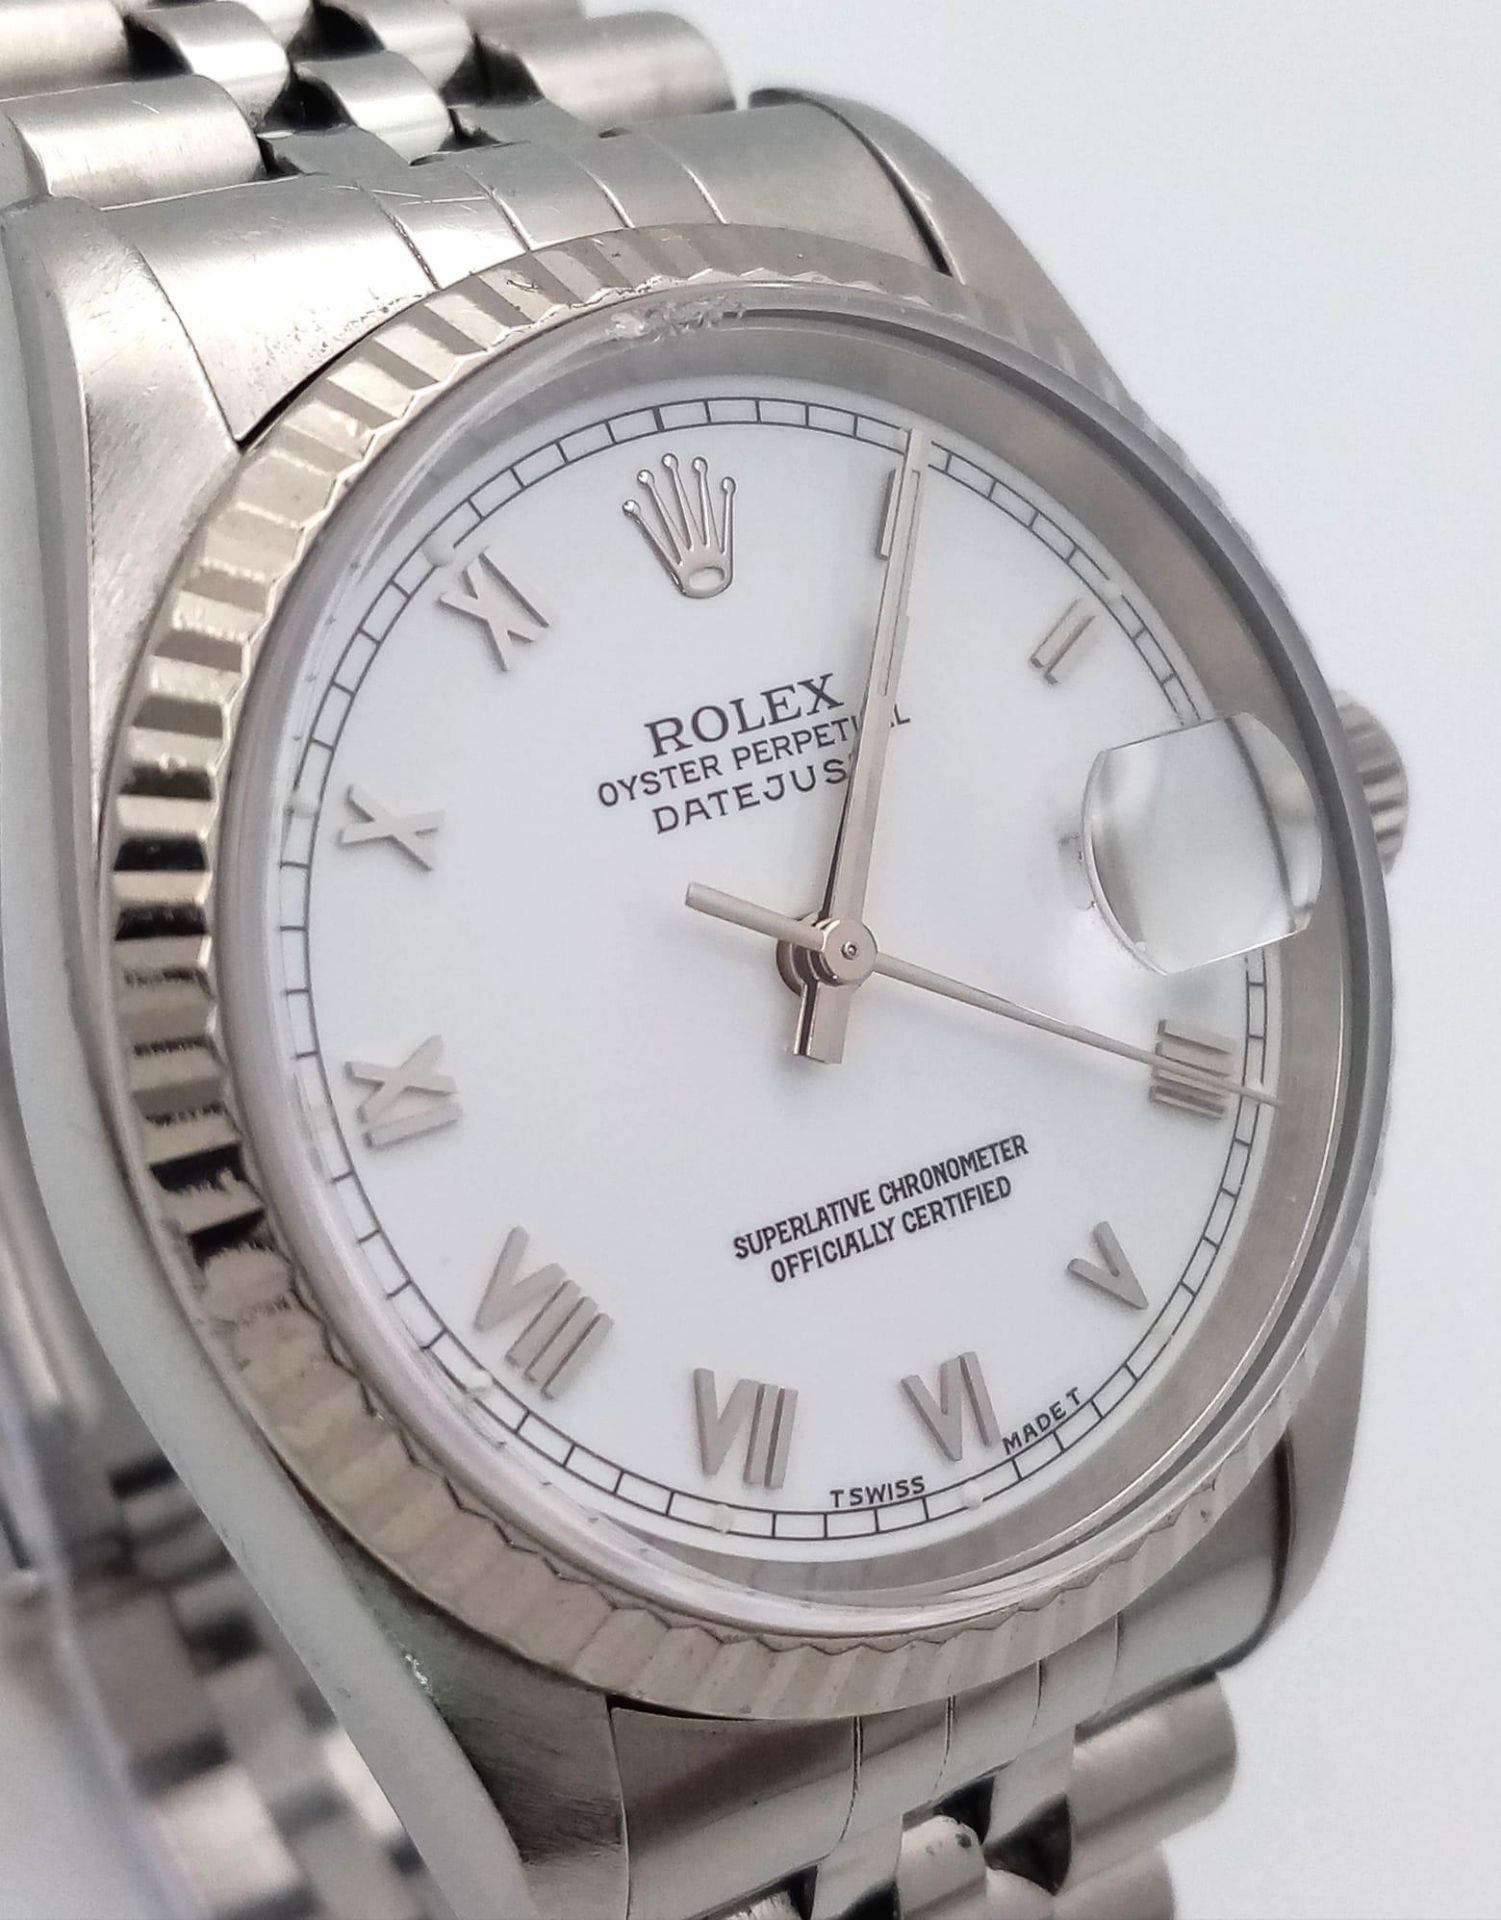 A GENTS ROLEX OYSTER PERPETUAL DATEJUST WATCH IN STAINLESS STEEL WITH WHITE DIAL , ROMAN NUMERALS - Image 4 of 19